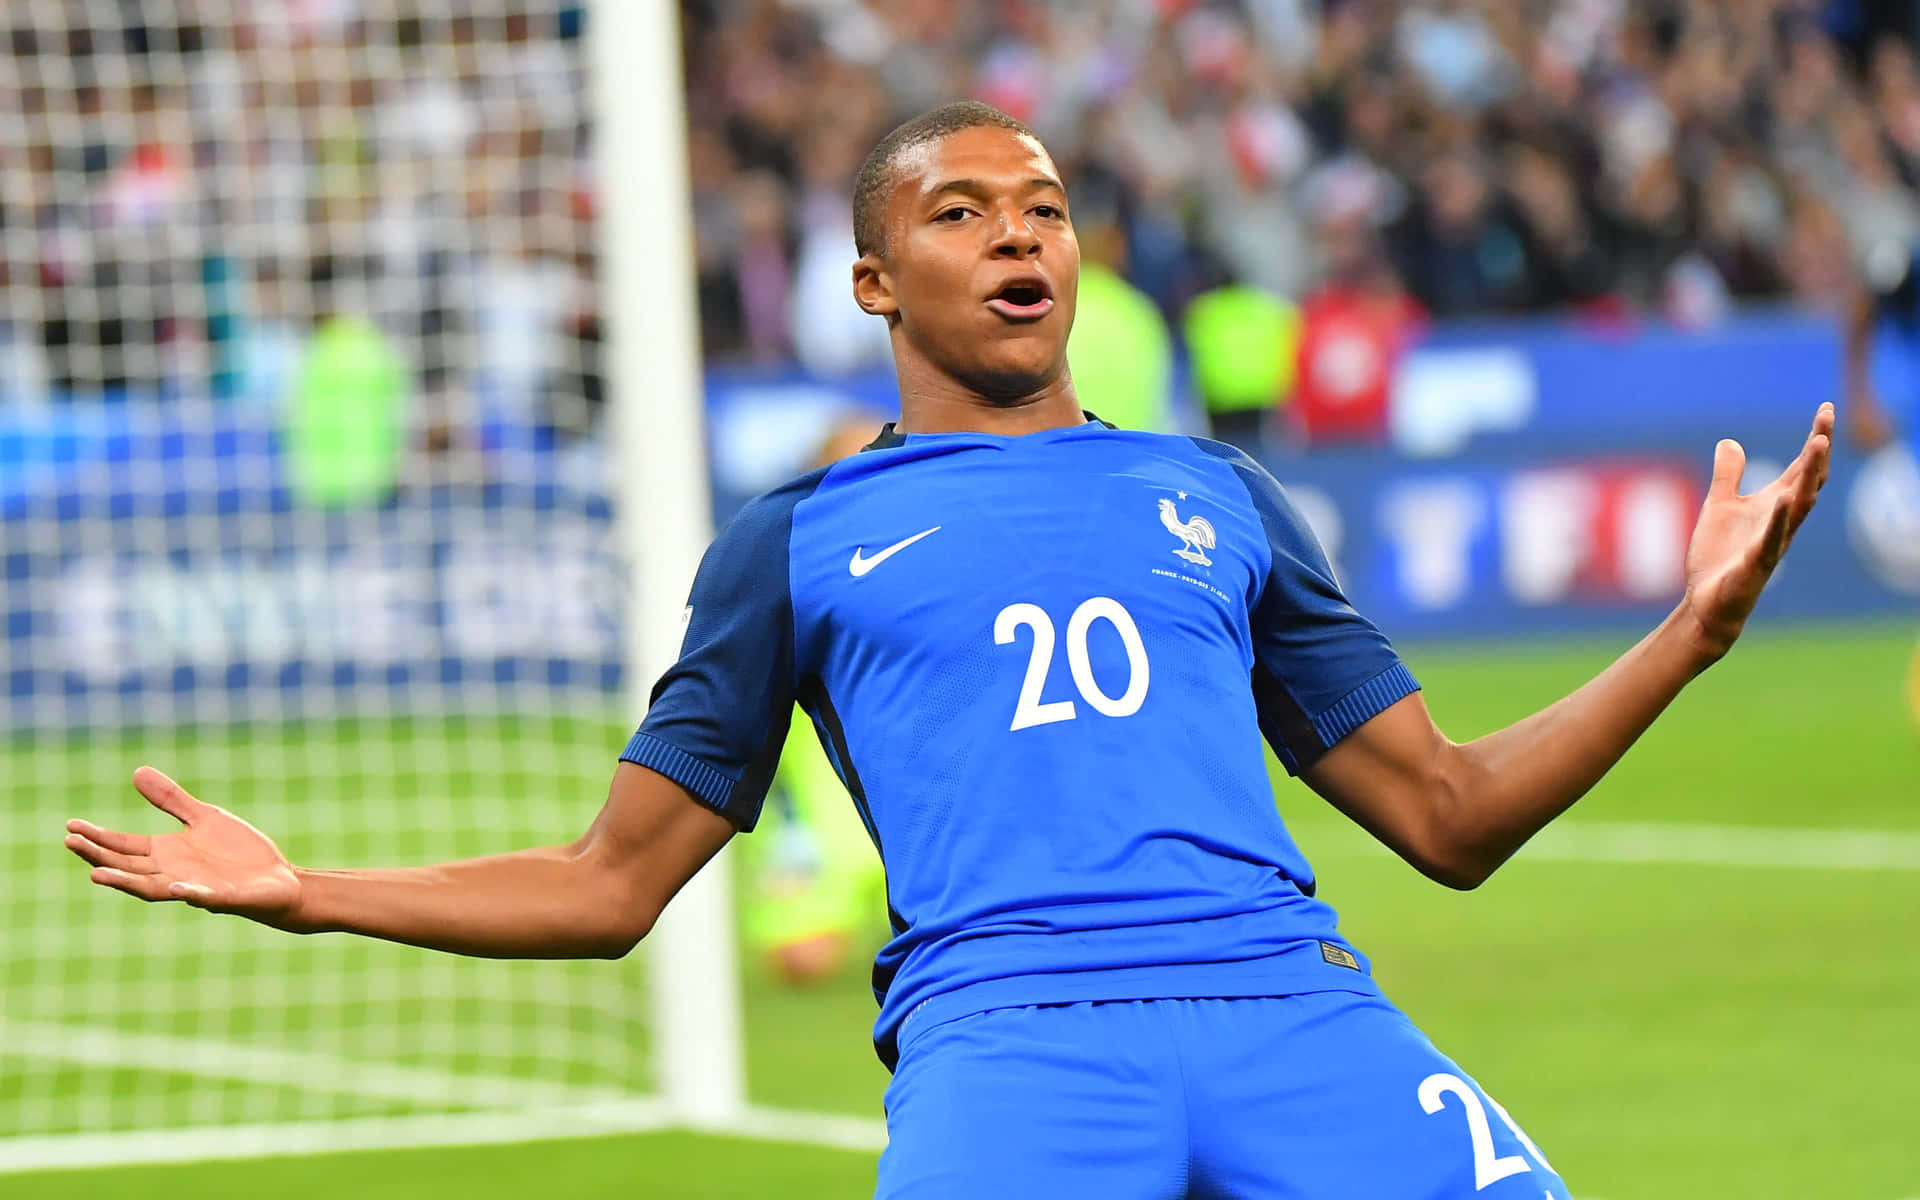 French Professional Footballer Kylian Mbappe